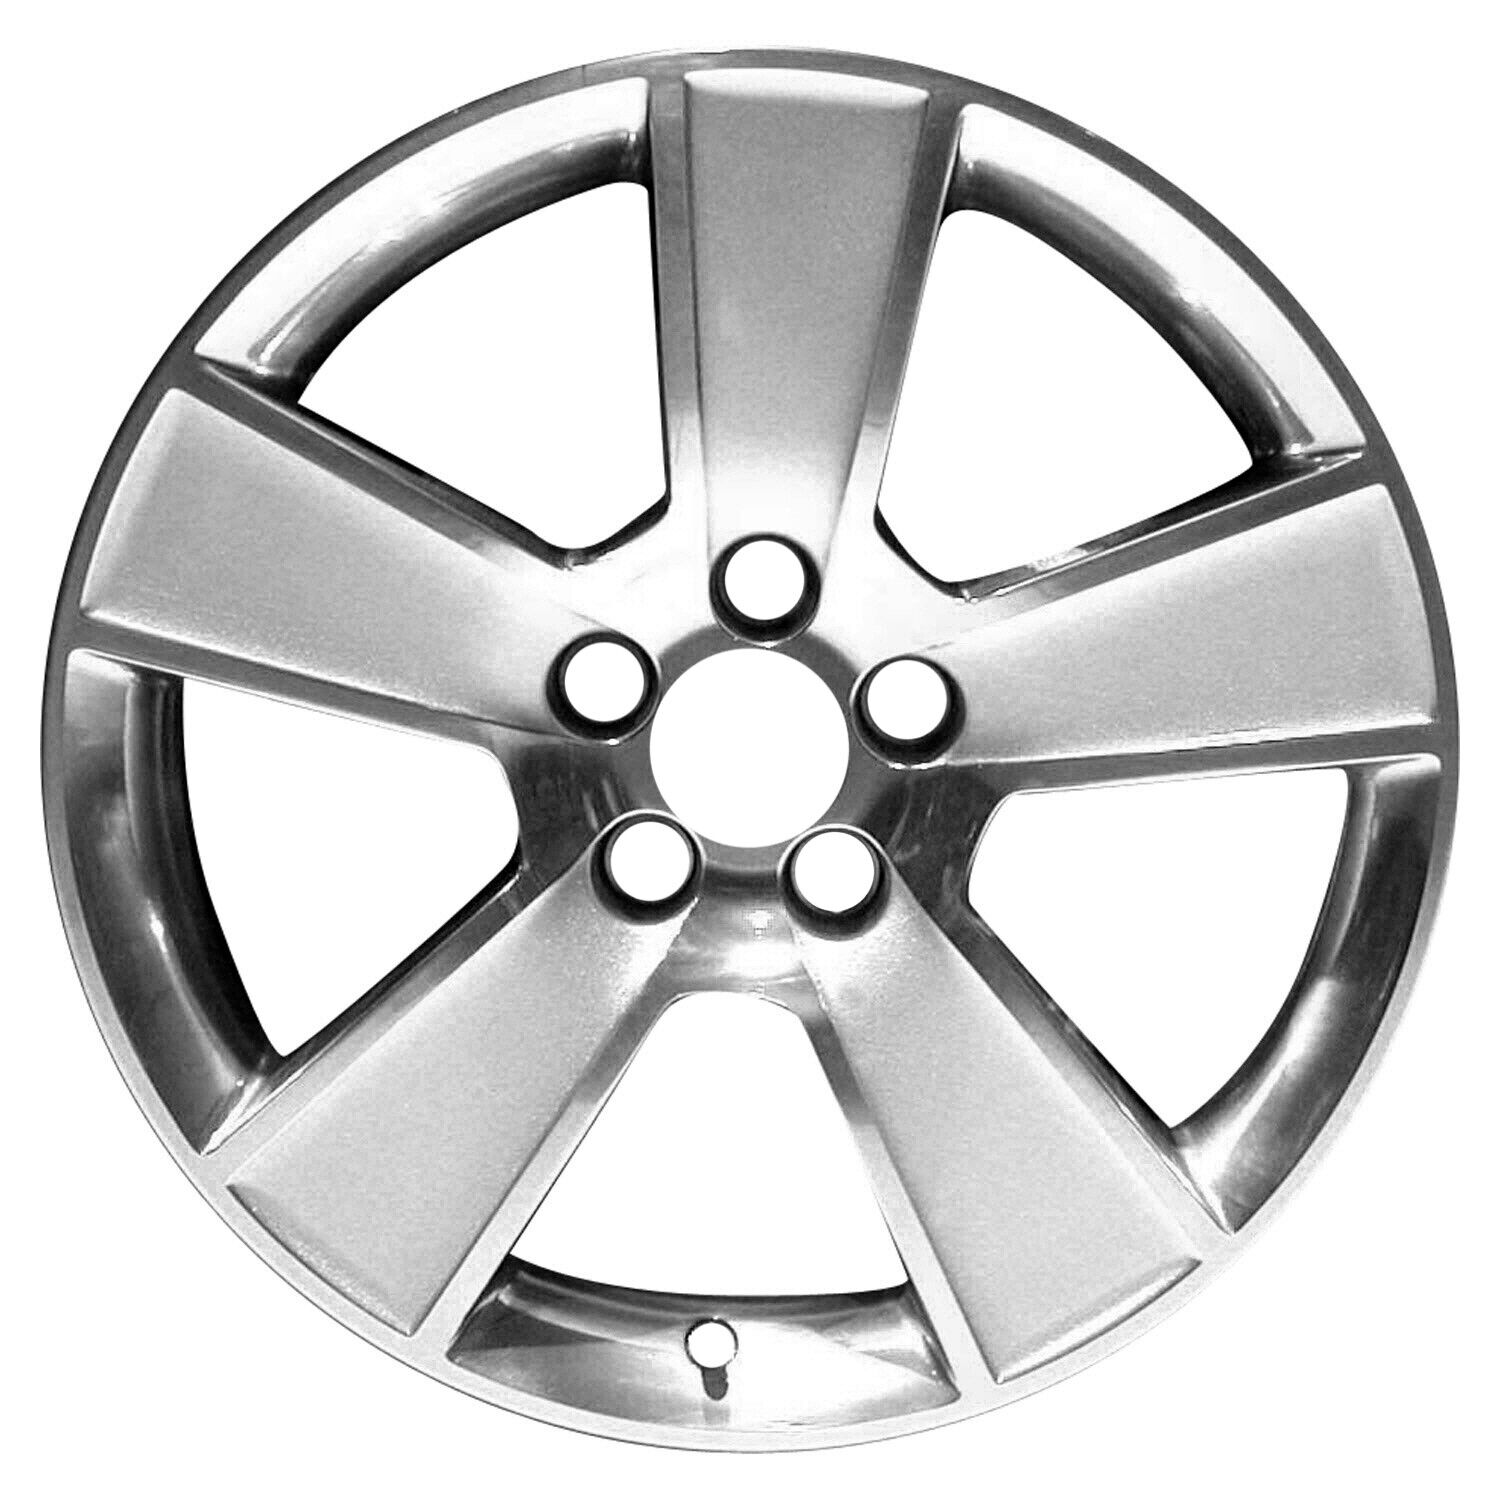 Reconditioned OEM 18X8.5 Alloy Wheel Sparkle Silver Painted 560-3647